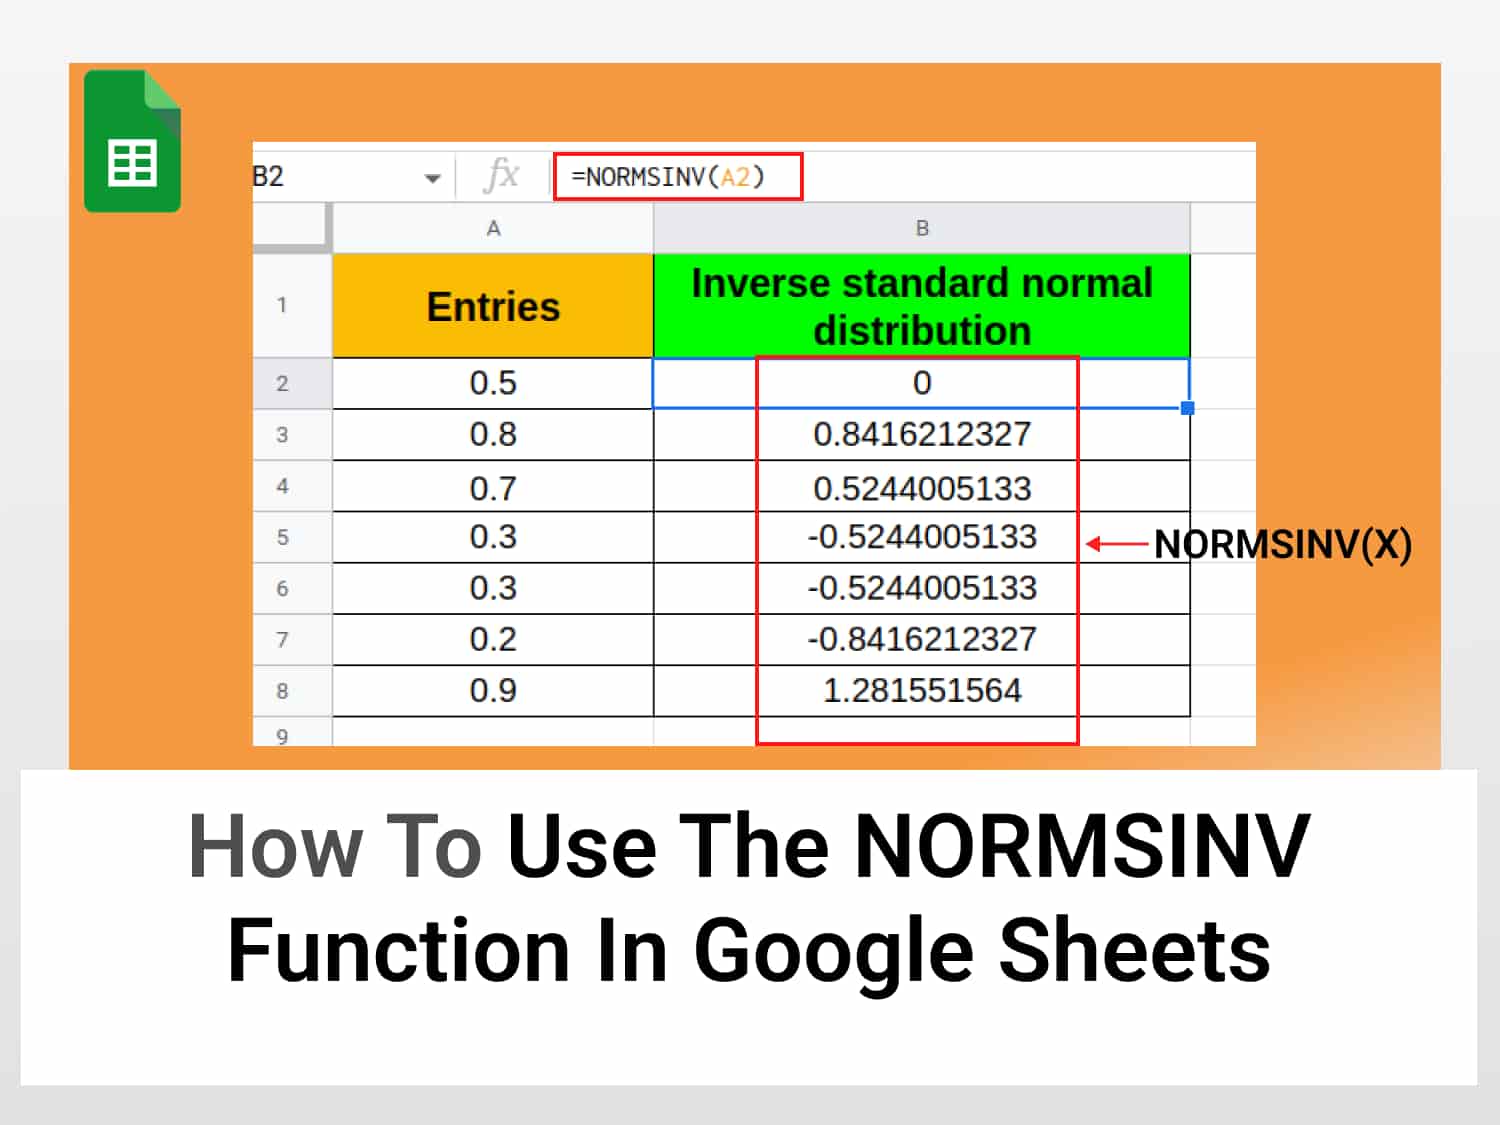 How to use the NORMSINV function in Google Sheets